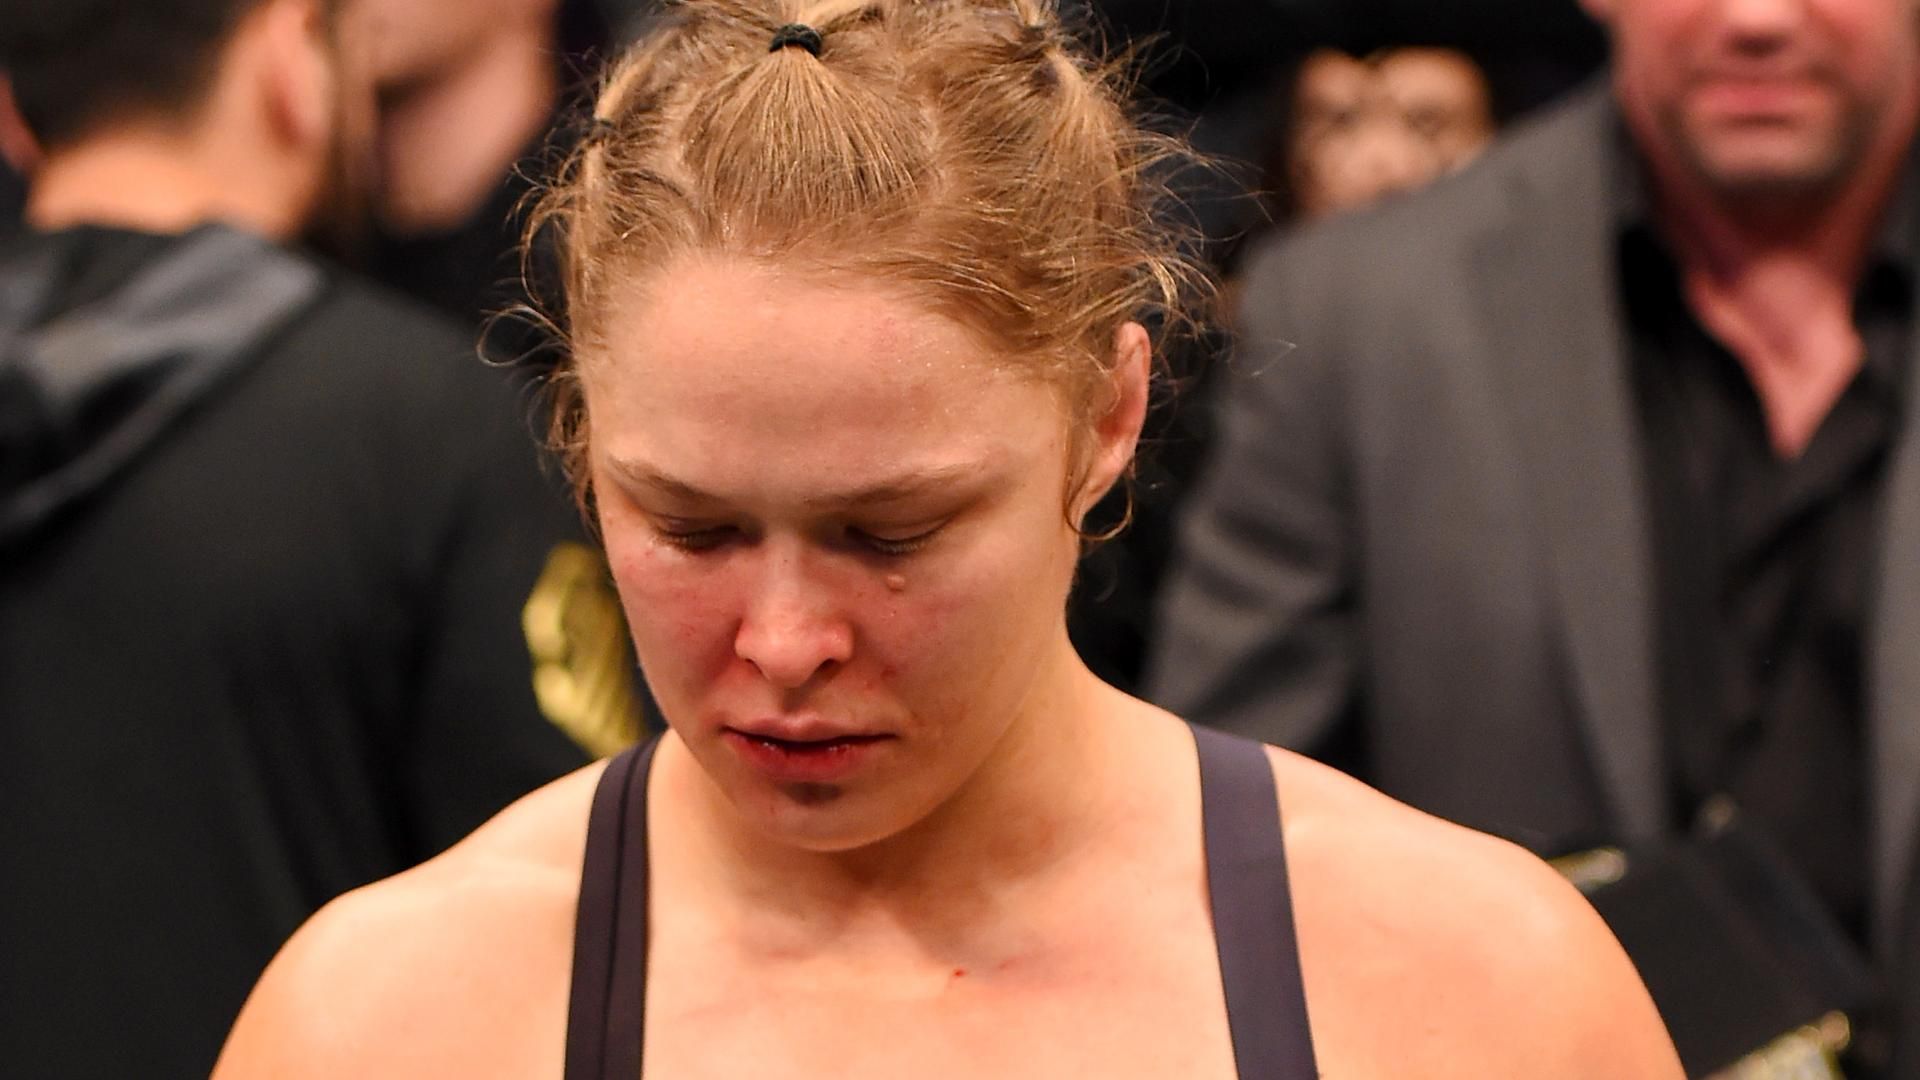 Mayweather defends Rousey